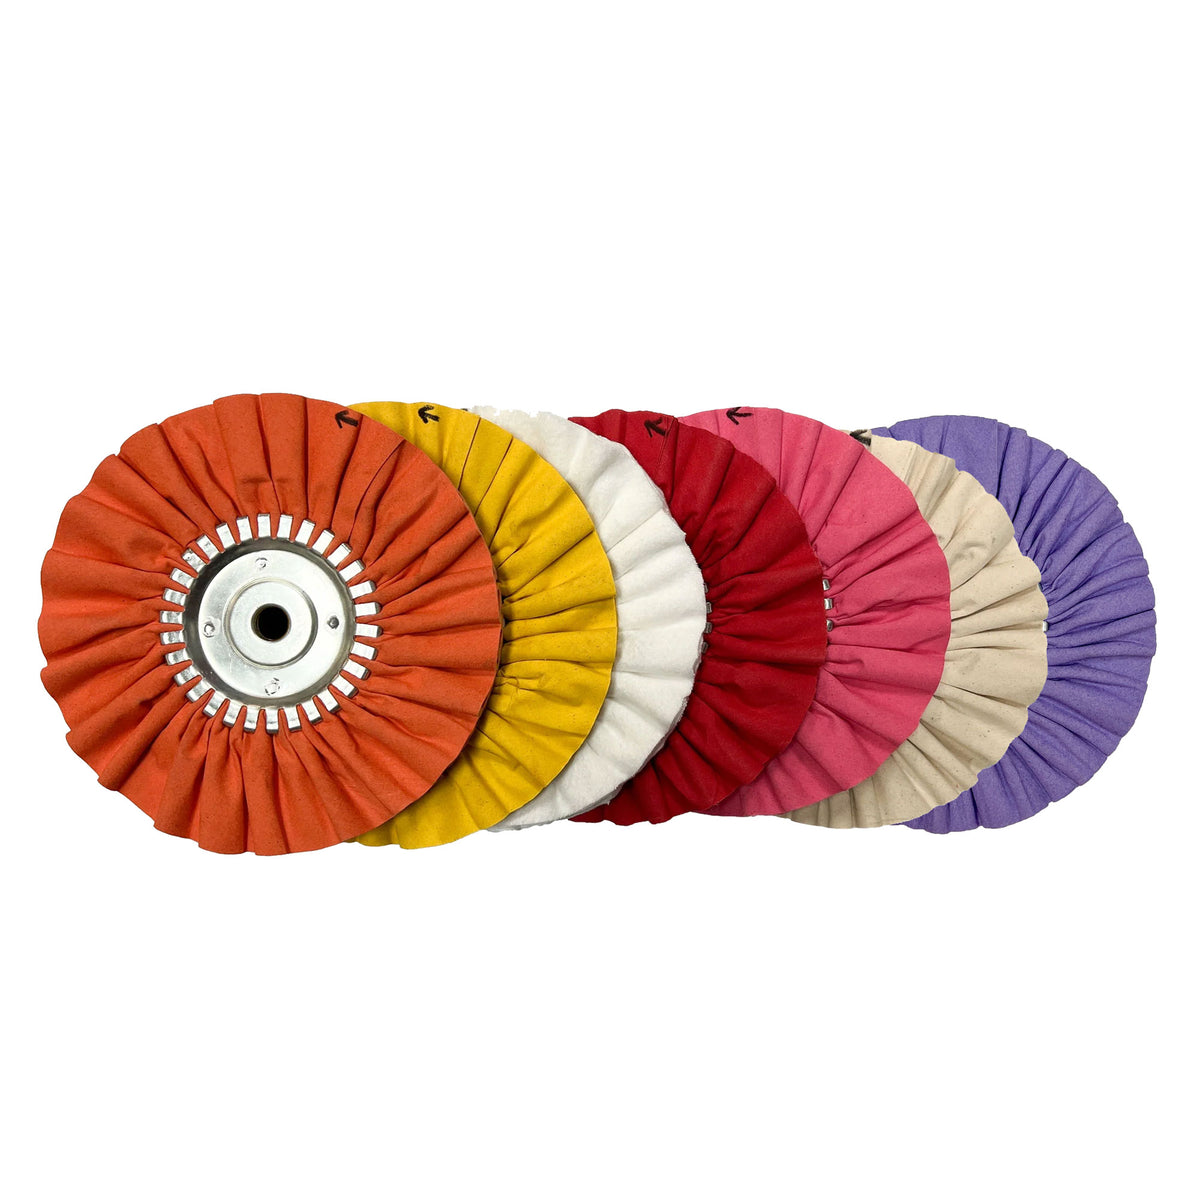 Assorted collection of 9-inch Solid-Center Airway Buffing Wheels from Renegade Products USA, perfect for achieving professional polishing results on a variety of surfaces.